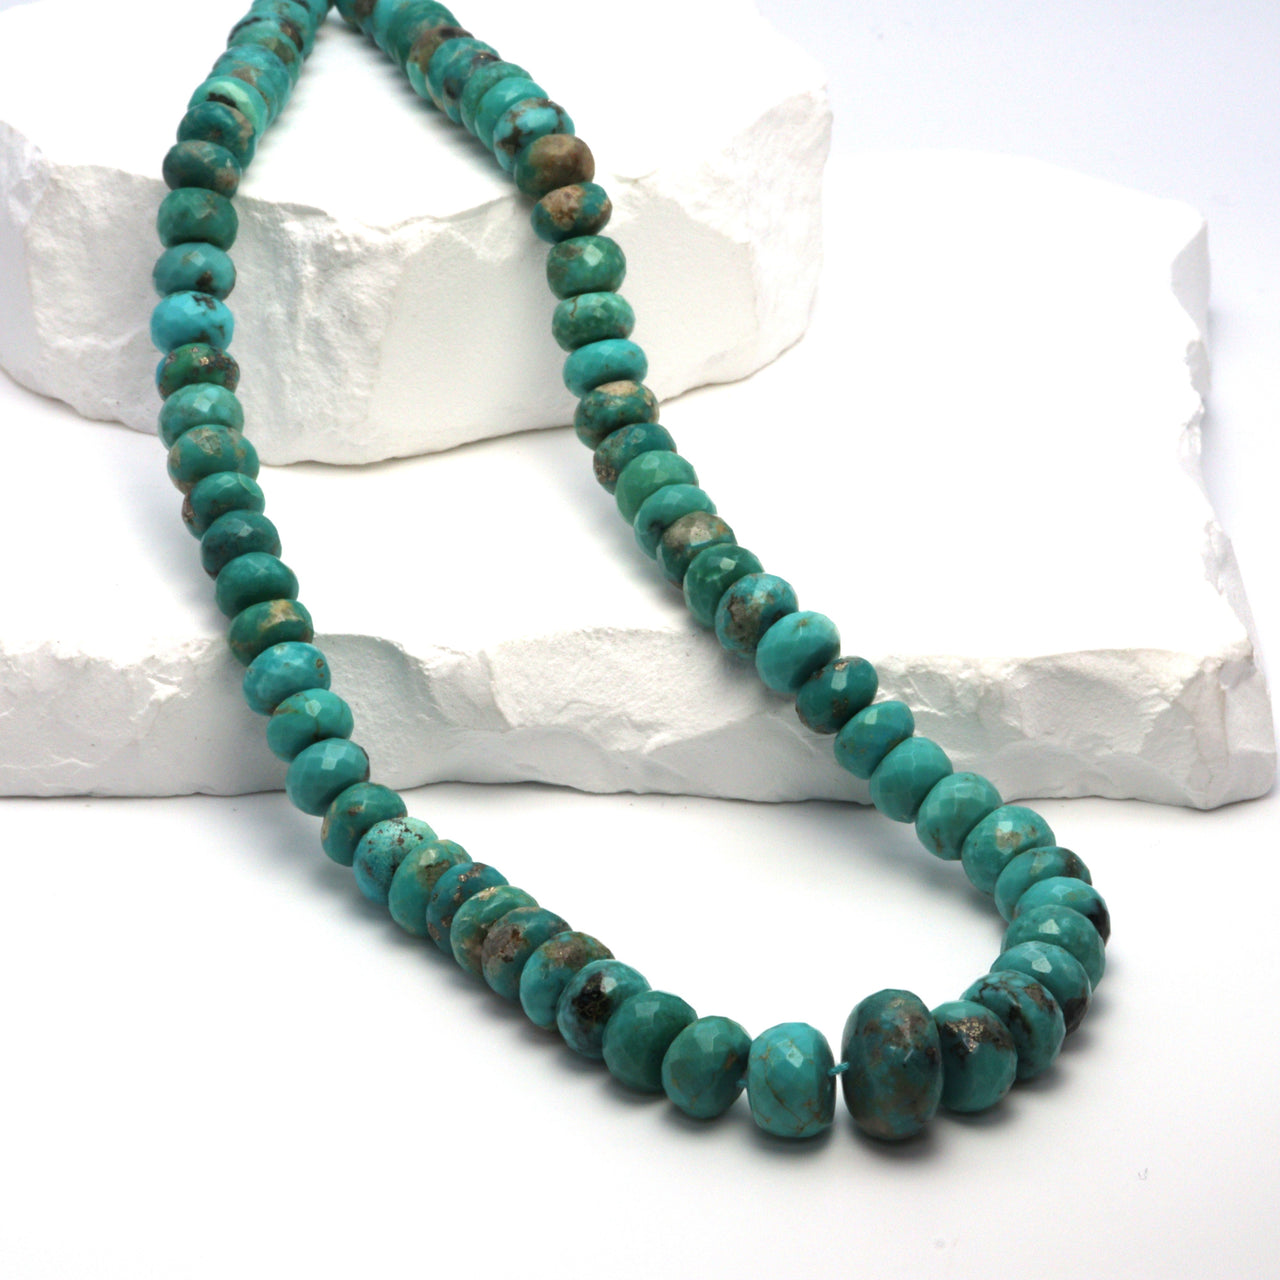 Natural Blue-Green Turquoise 8mm Faceted Rondelles